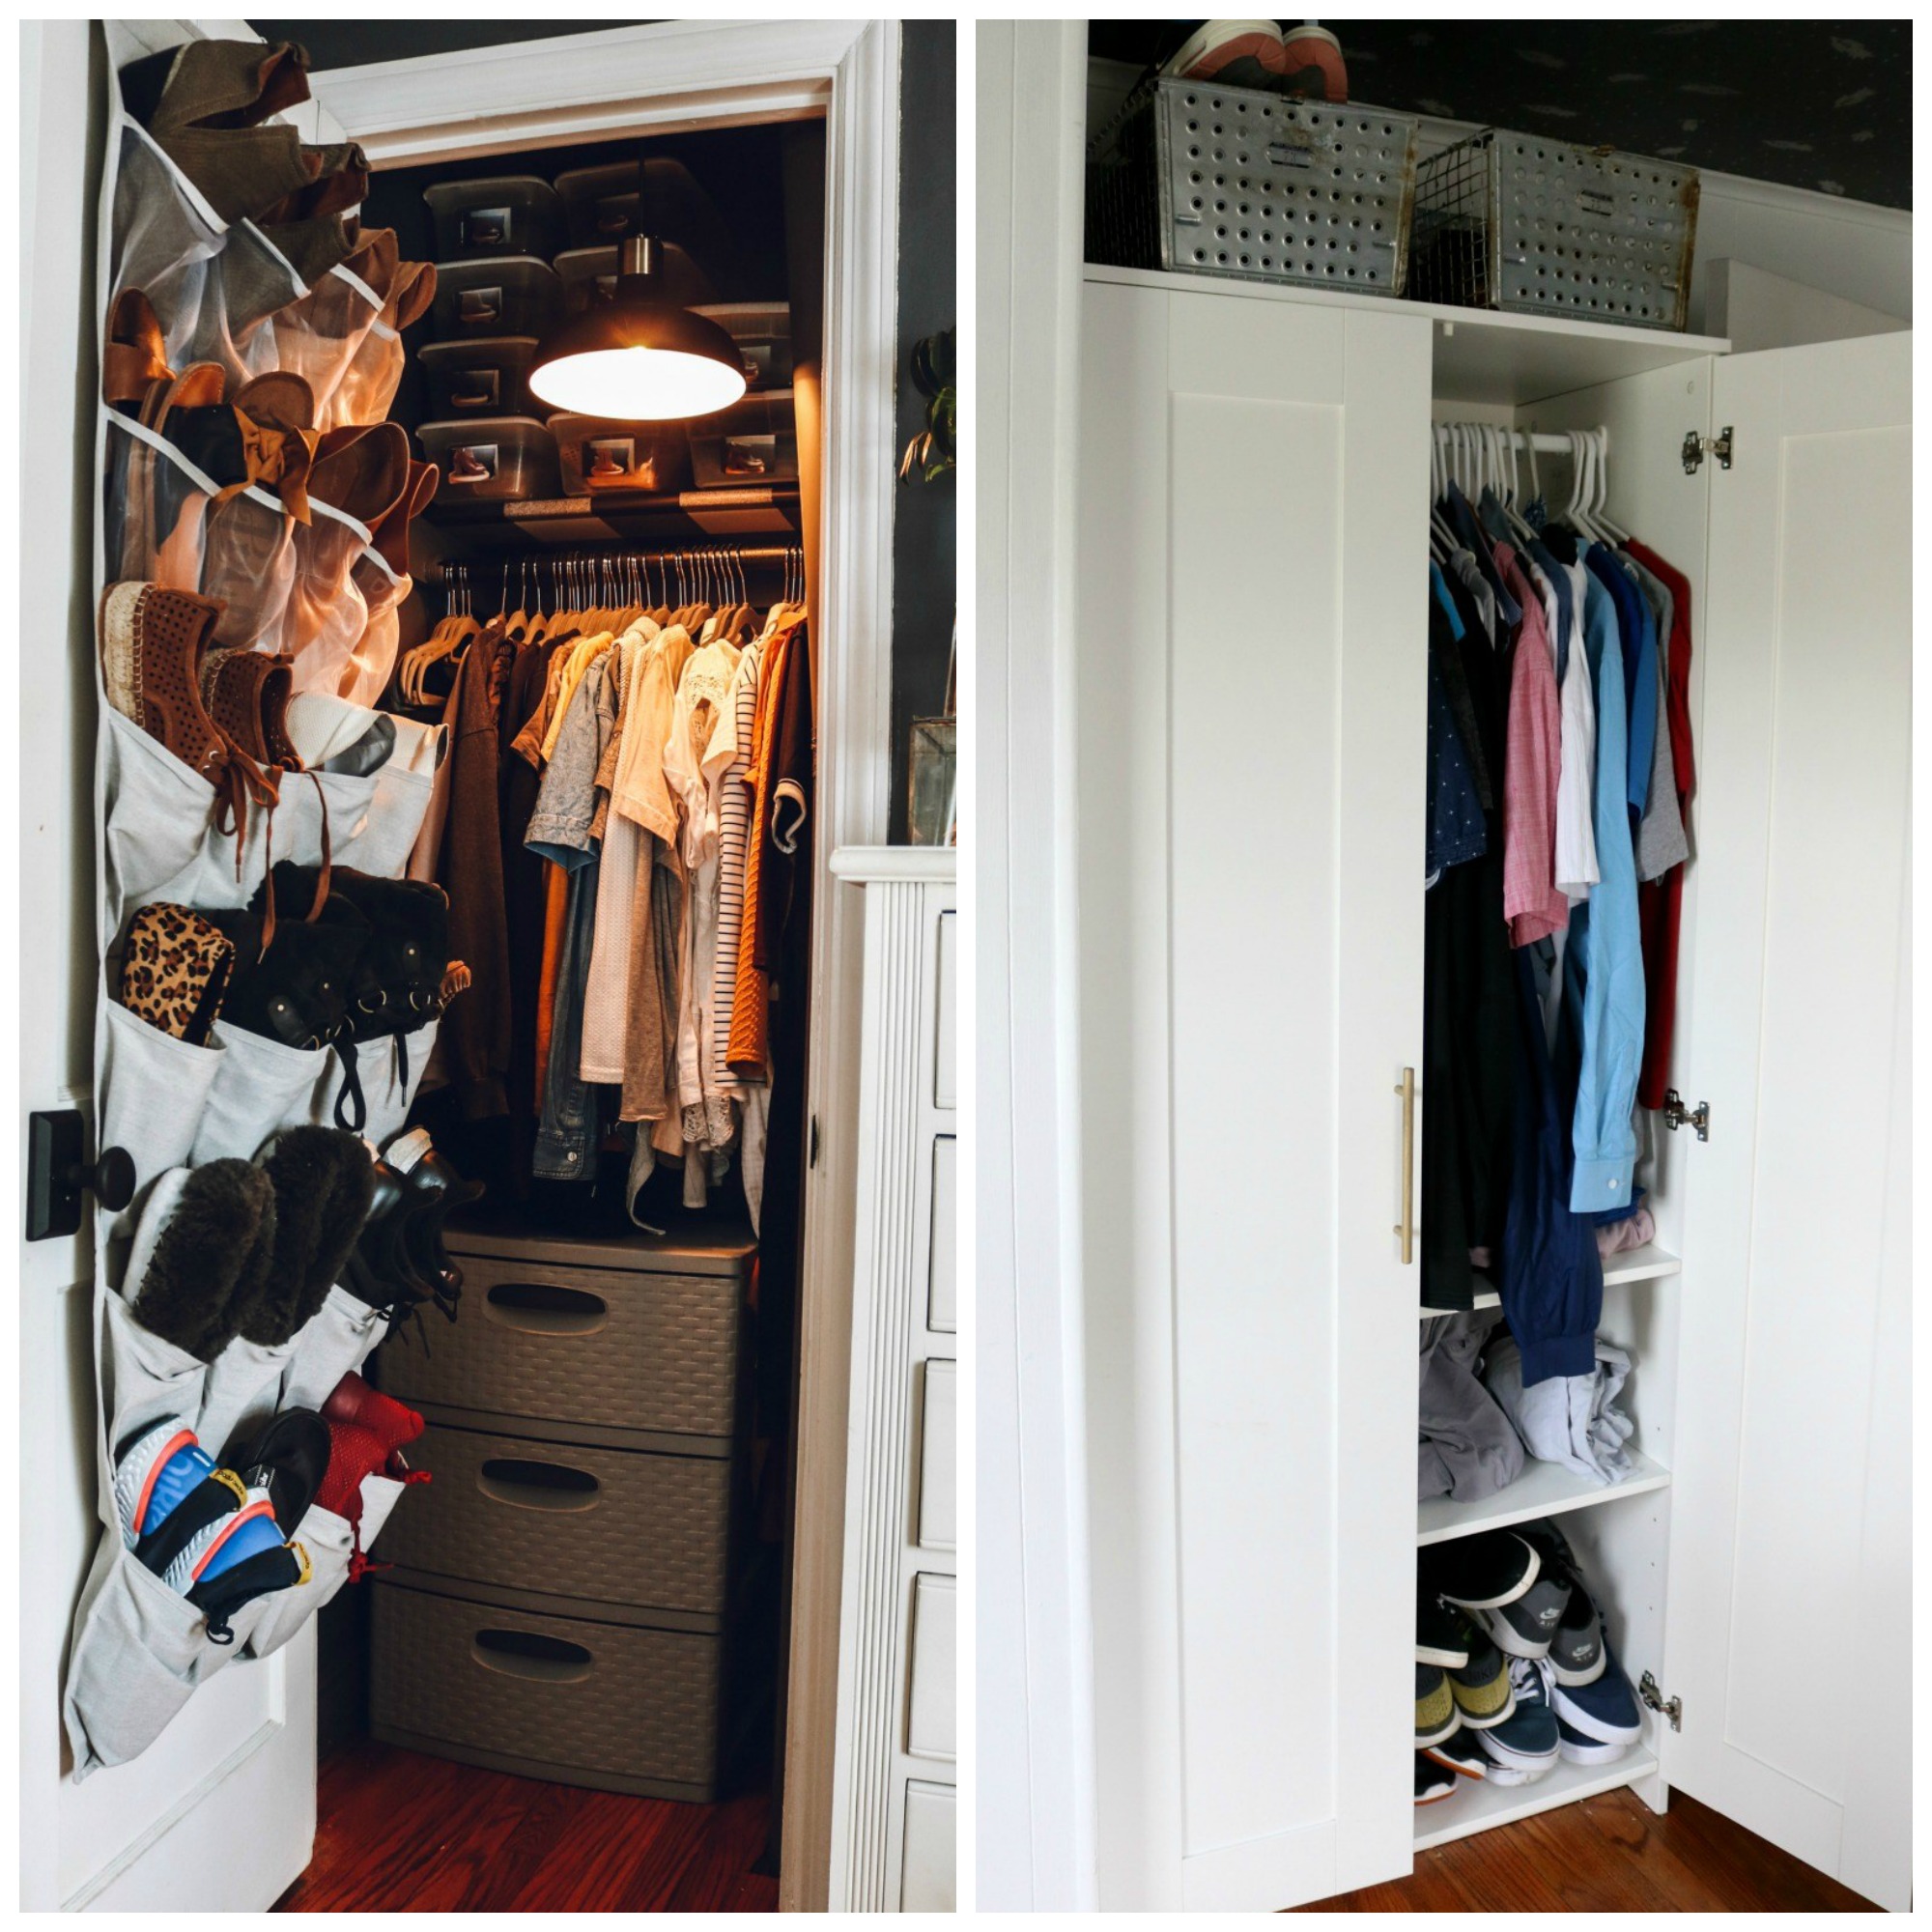 Our new Master Closet- IKEA PAX System